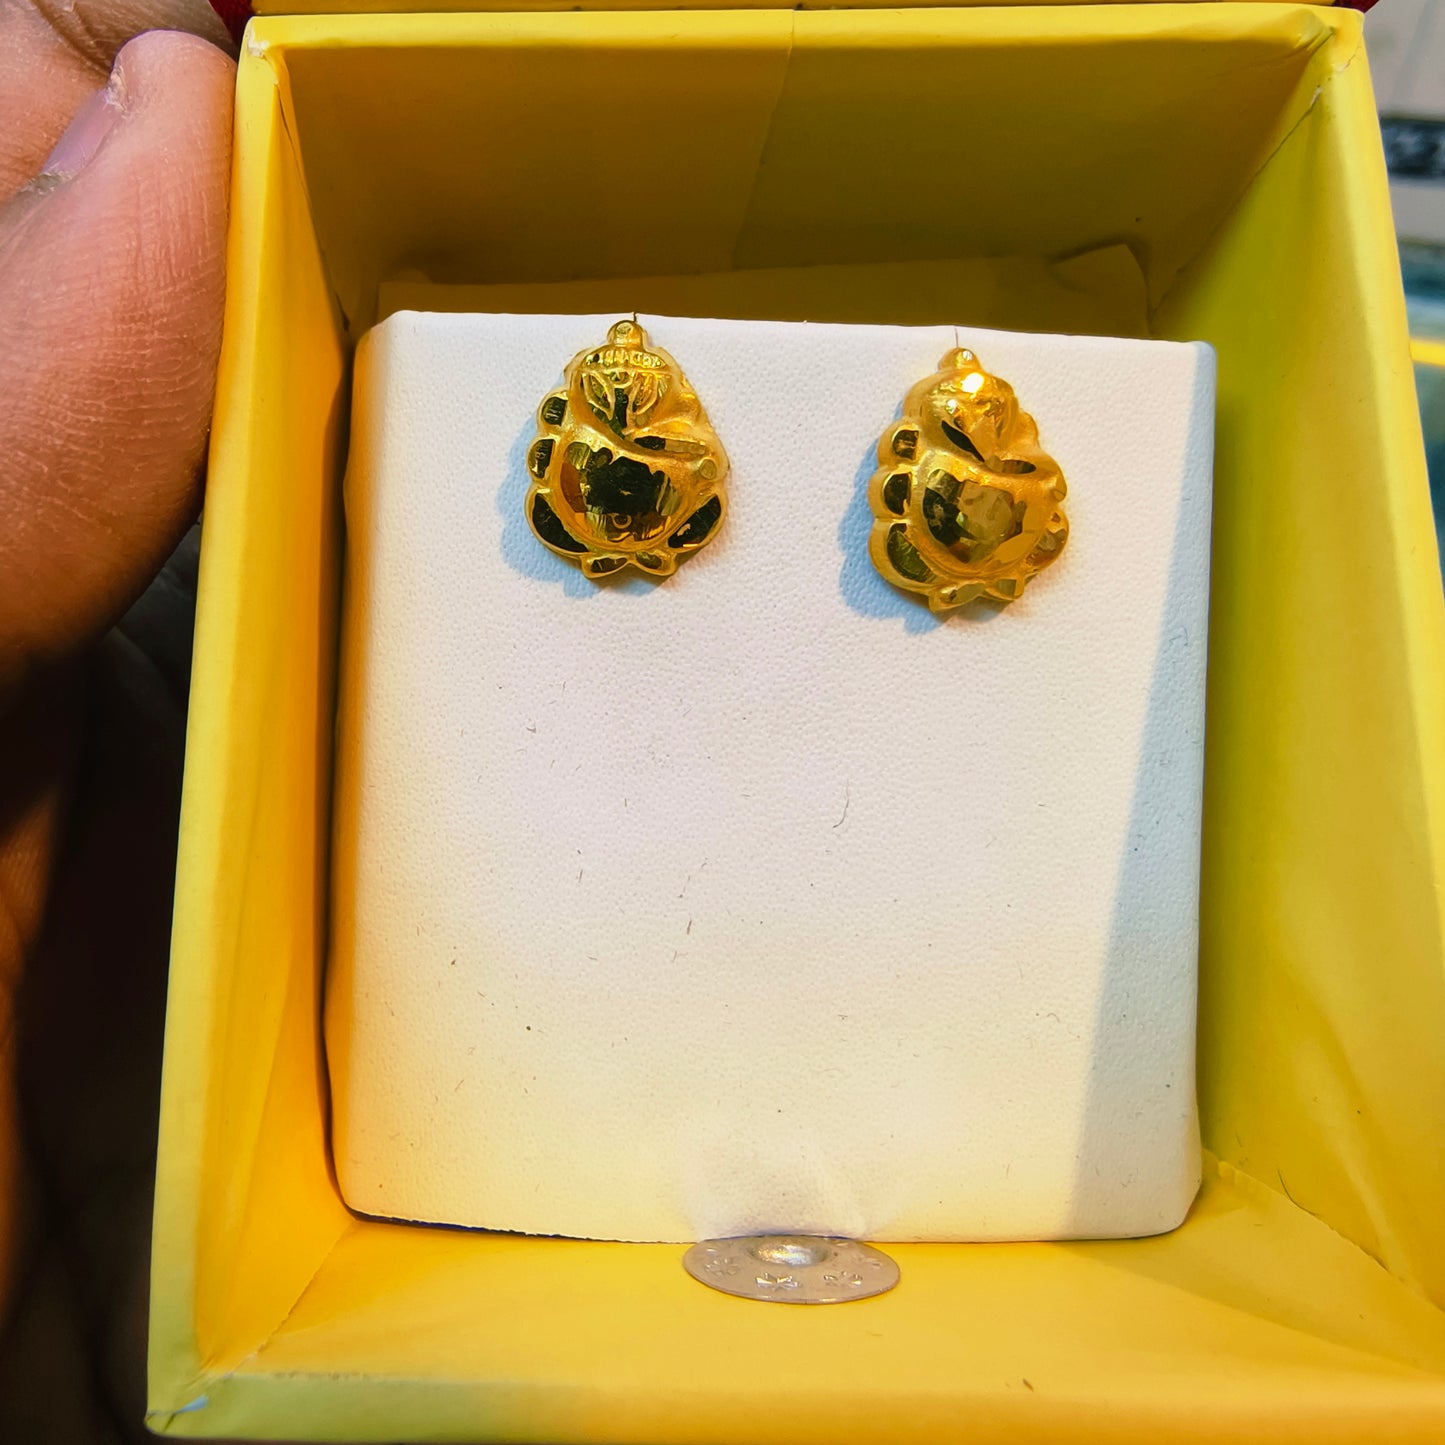 KDM GOLD EAR TOPS FOR GIFT PURPOSE IN MARRIAGE AND ANNIVERSARY 1 PAIR APPROX WGT: 0.400 GM